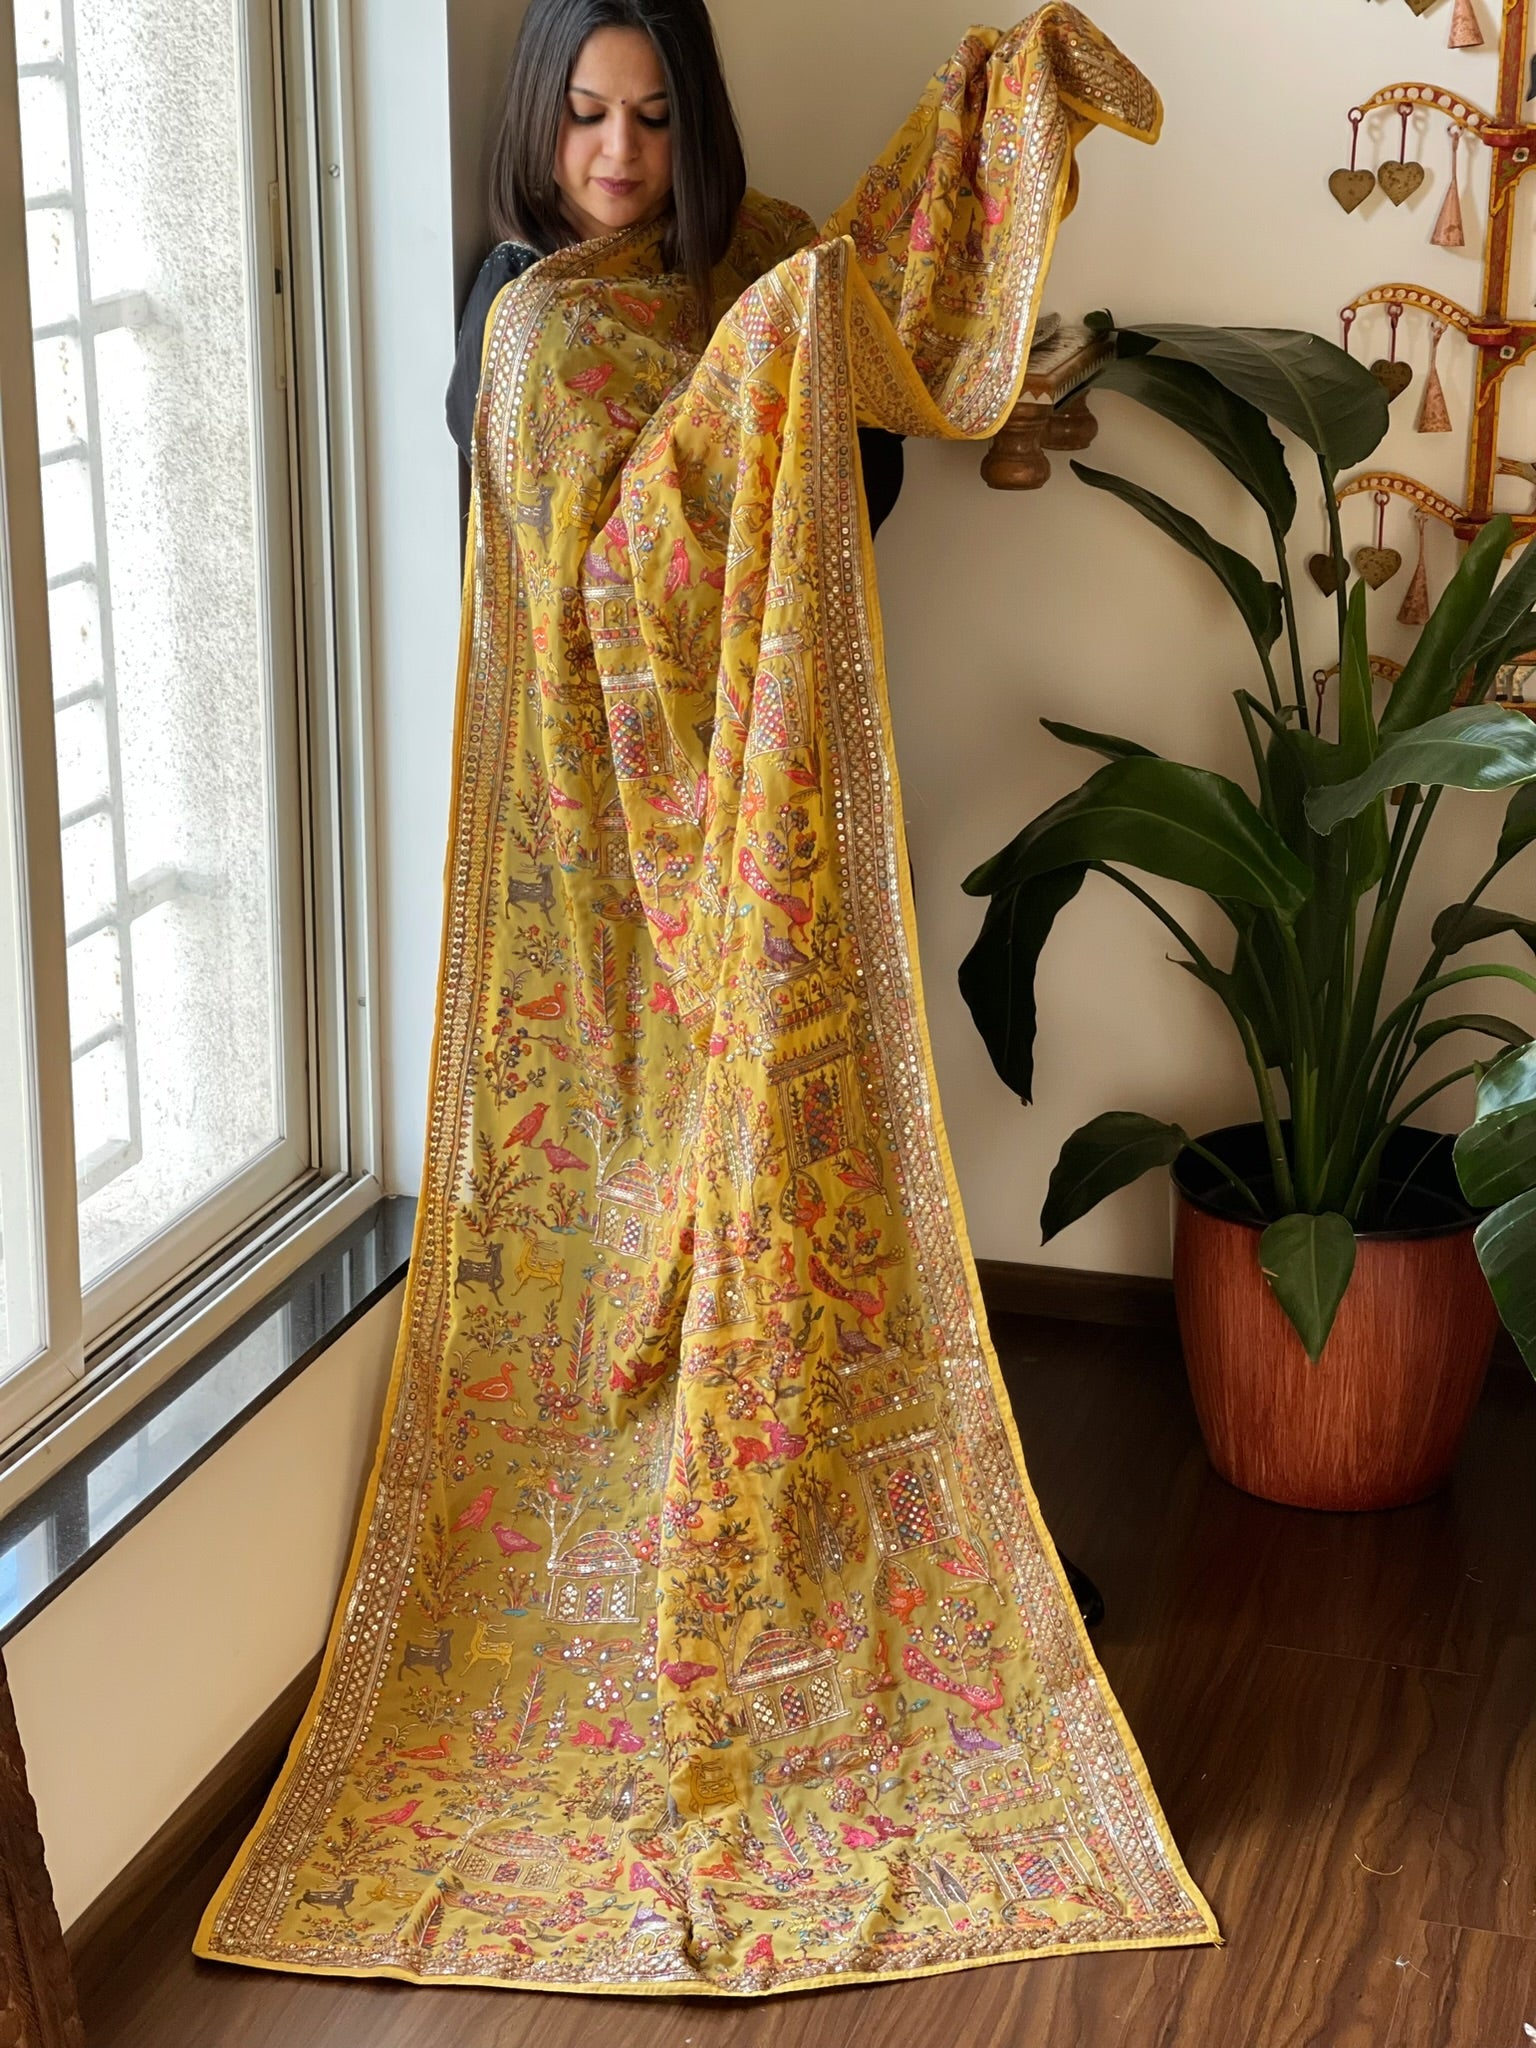 Georgette Dupatta with Thread & Sequin Embroidery